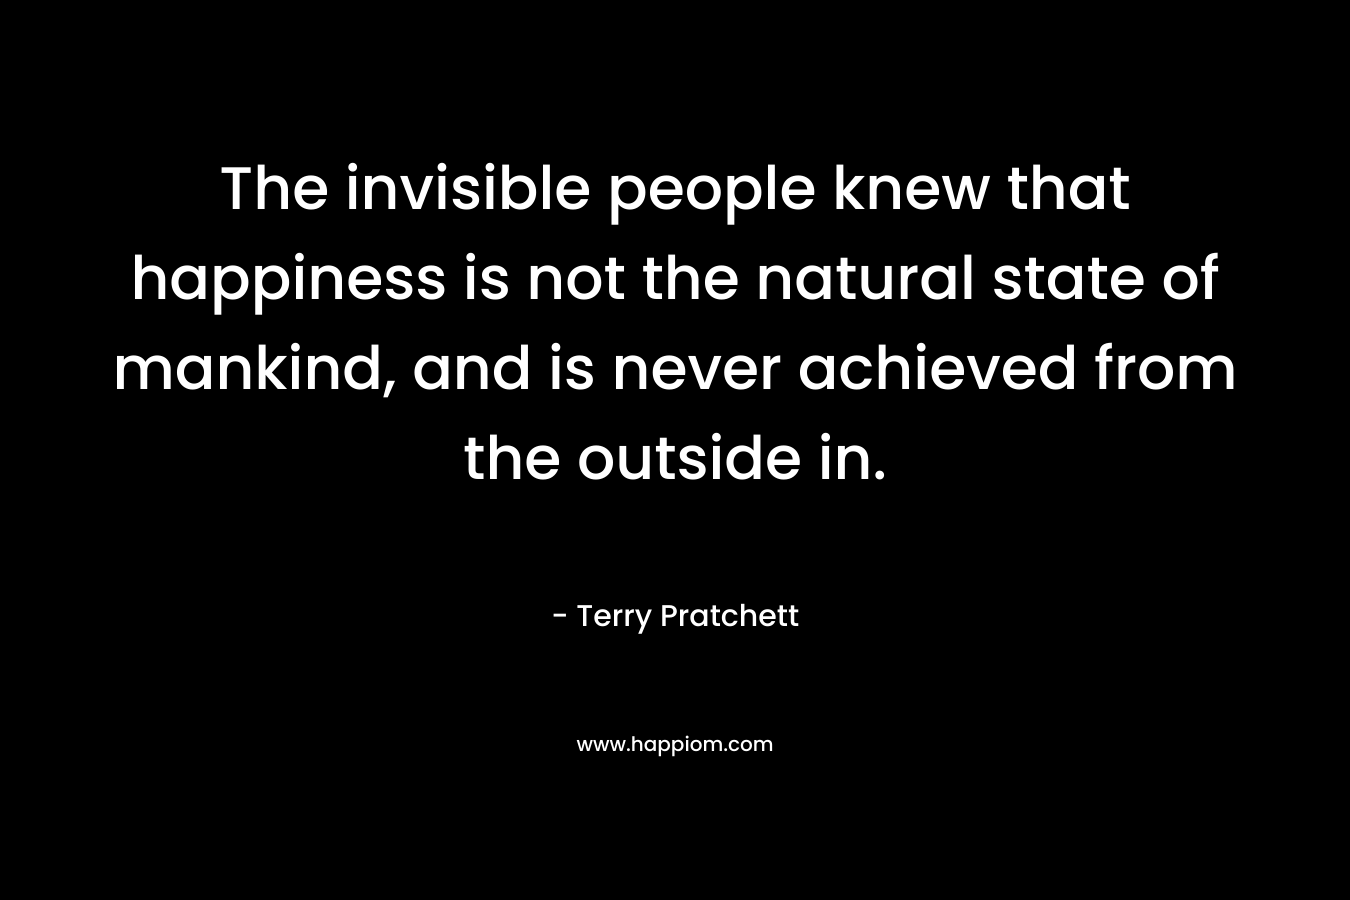 The invisible people knew that happiness is not the natural state of mankind, and is never achieved from the outside in. – Terry Pratchett